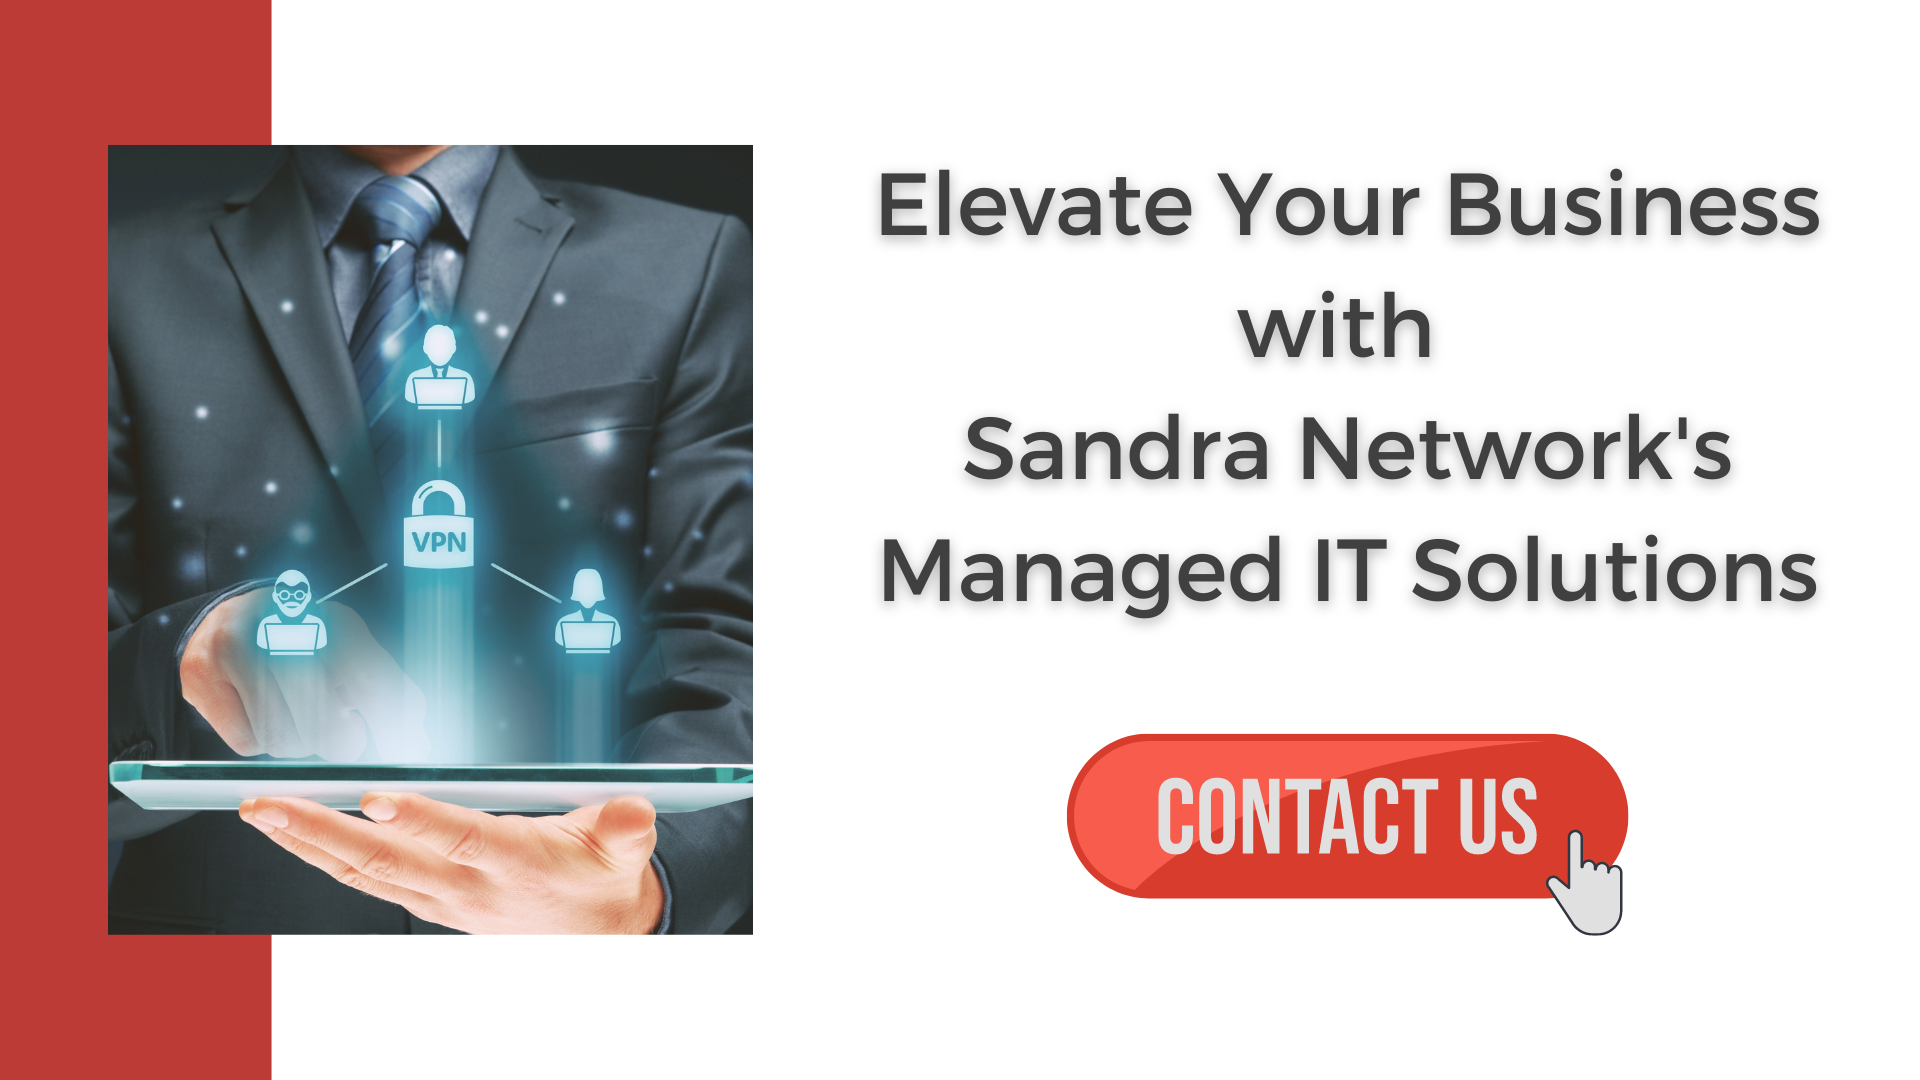 Contact Sandra Network and Elevate Your Business